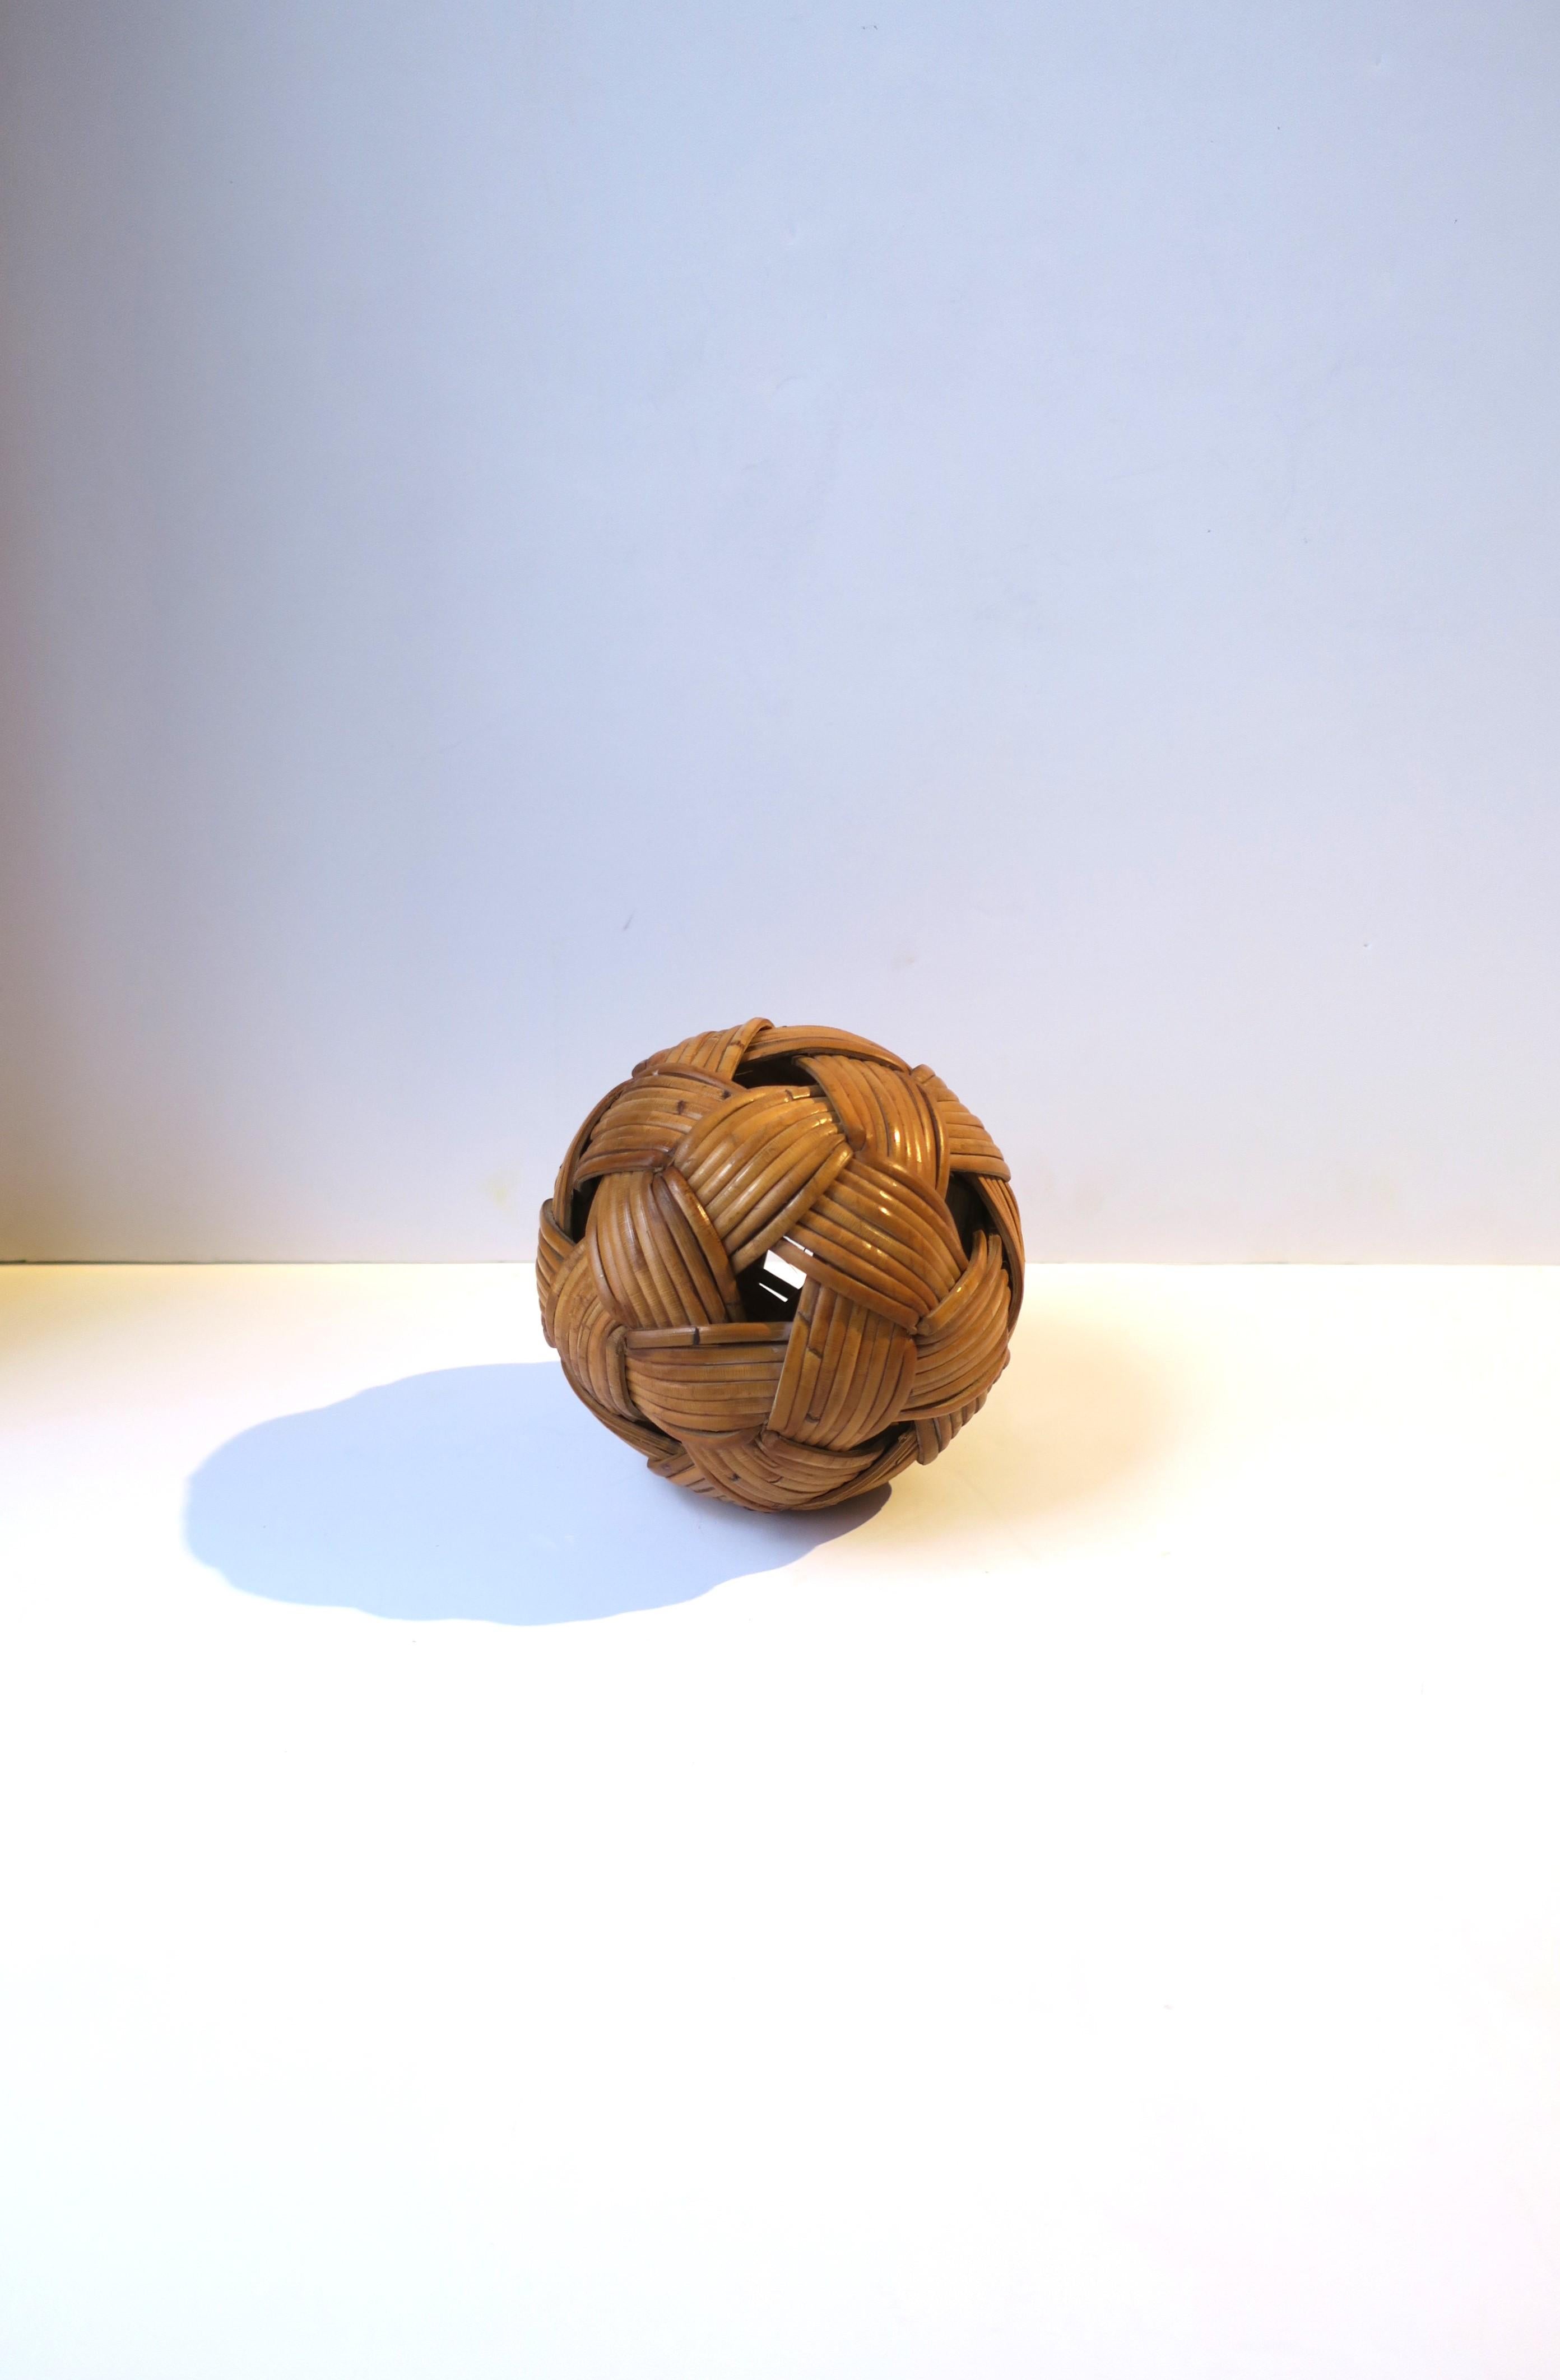 Chinoiserie Wicker Rattan Ball Sphere Decorative Object For Sale